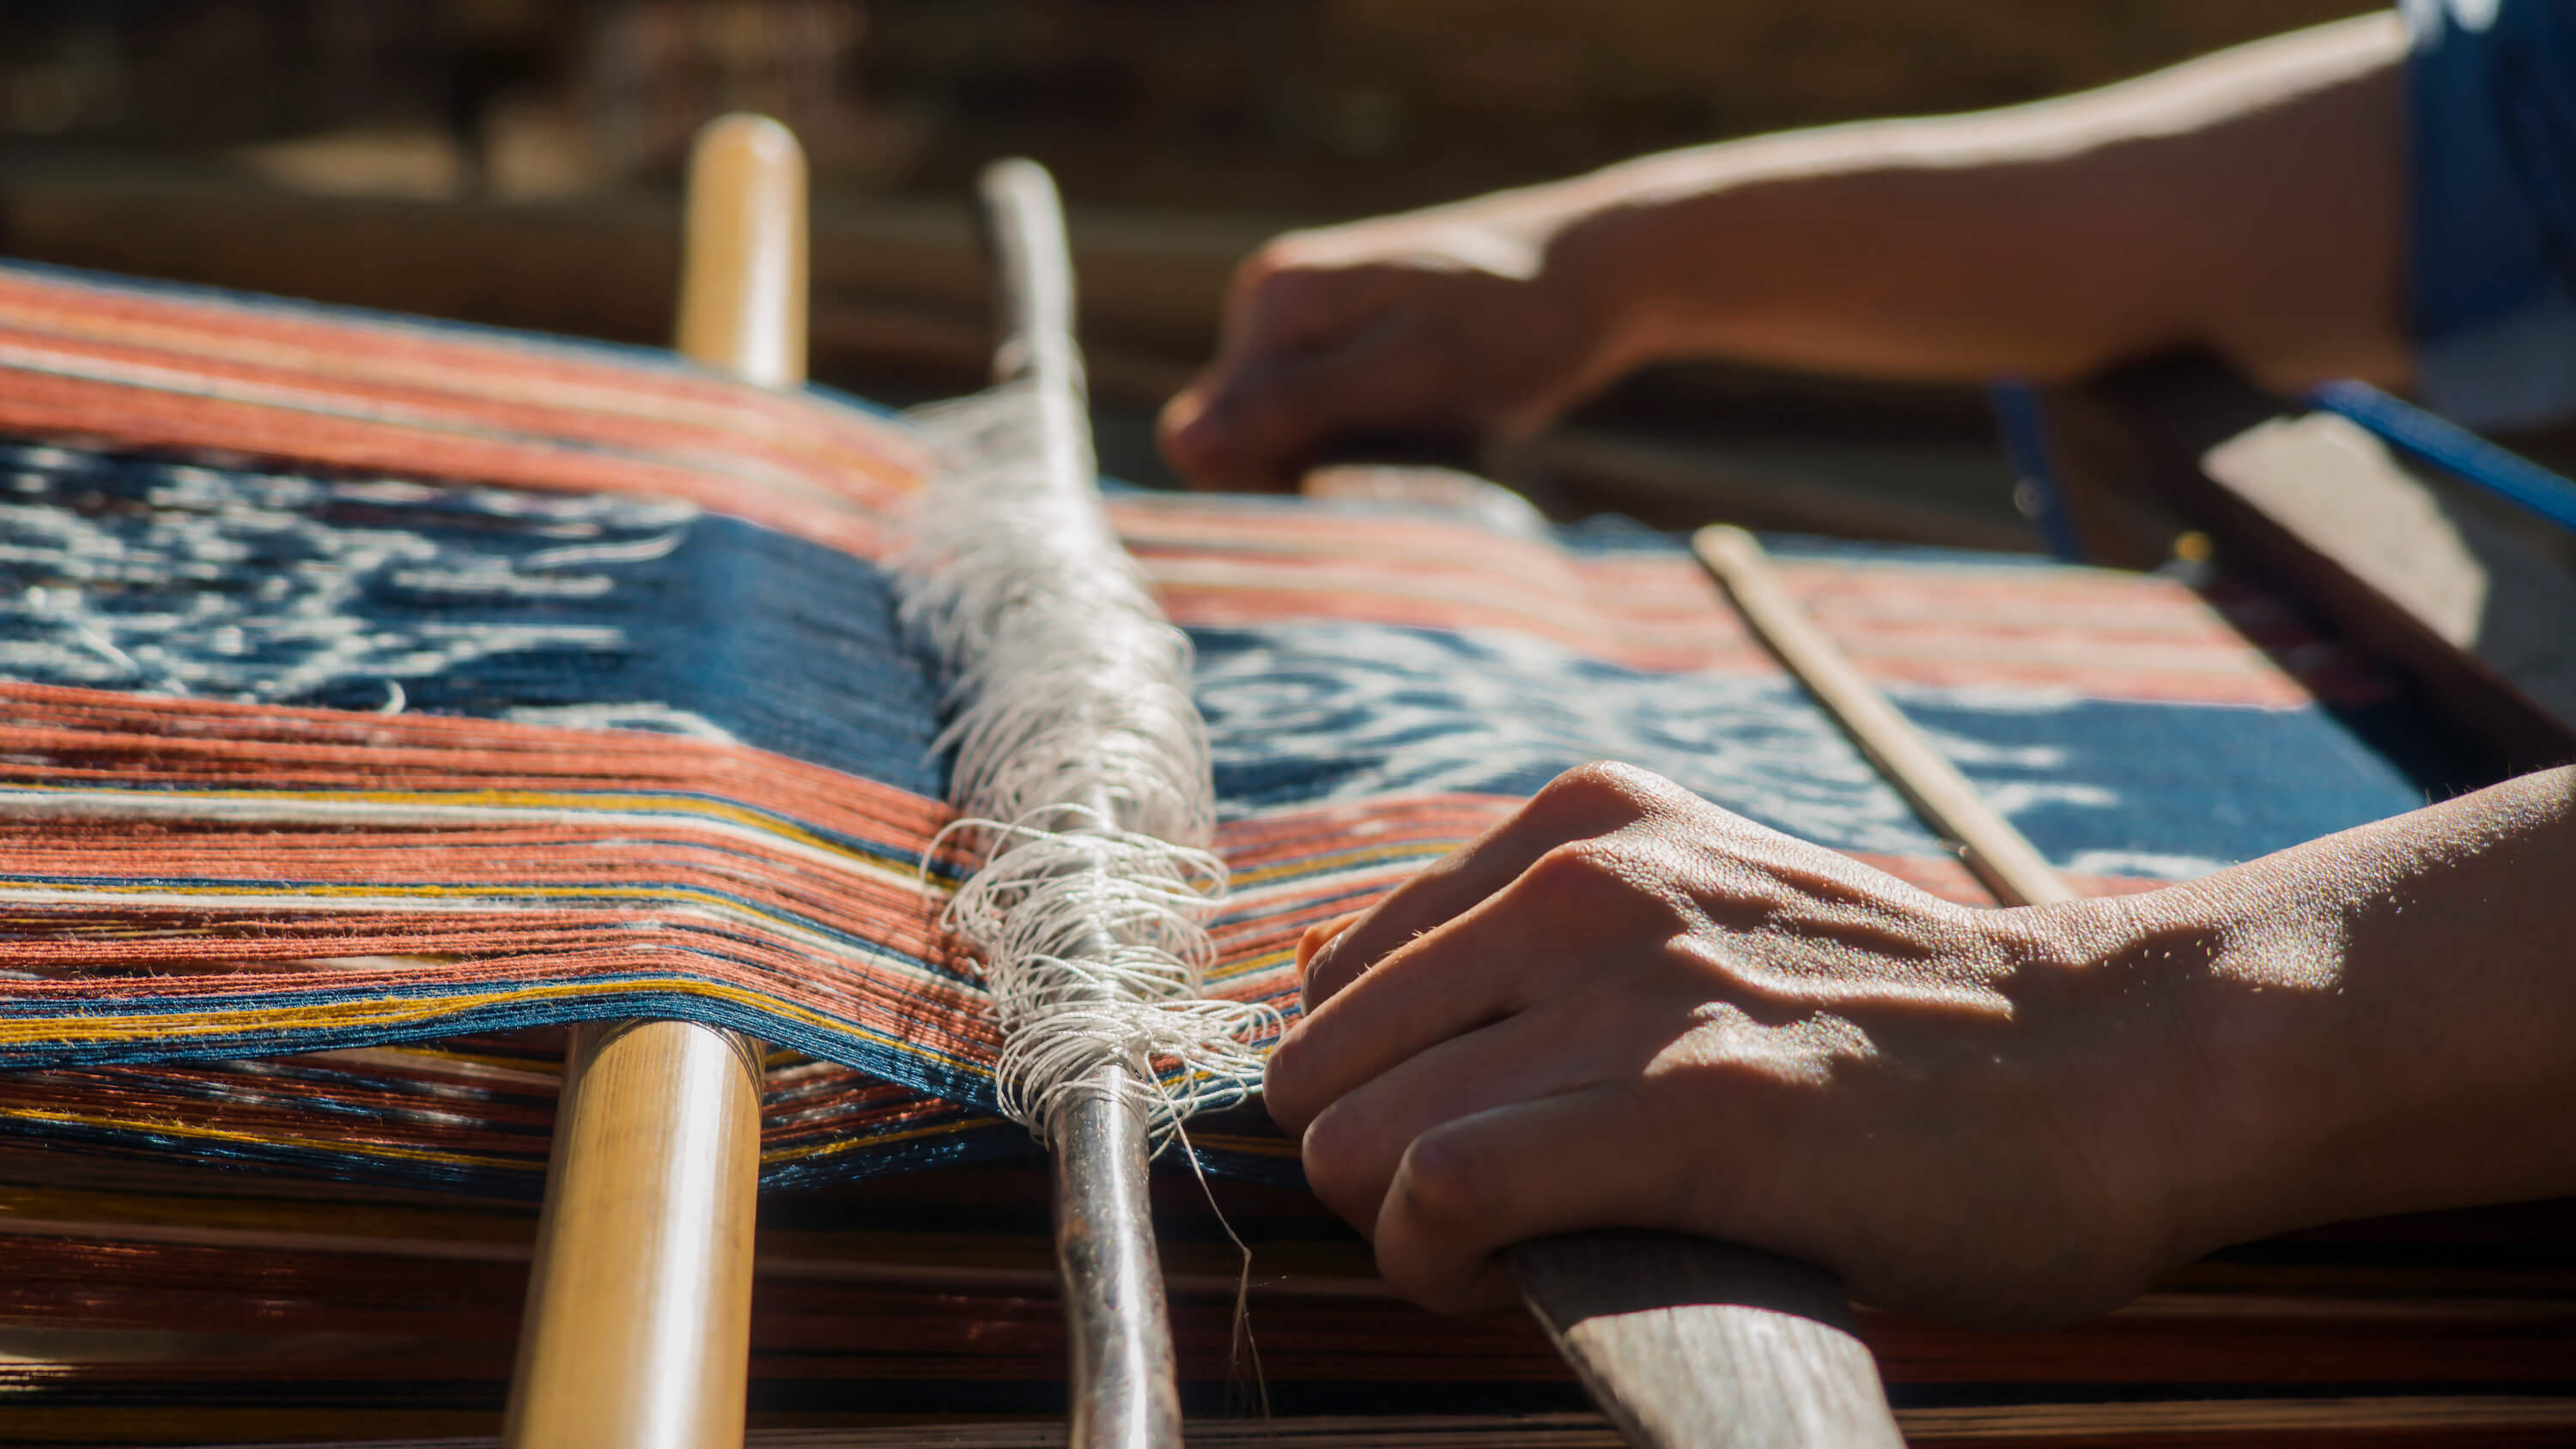 As the weft is fed through the warps, threads transform info fabric. Photo by Andra Fembriarto